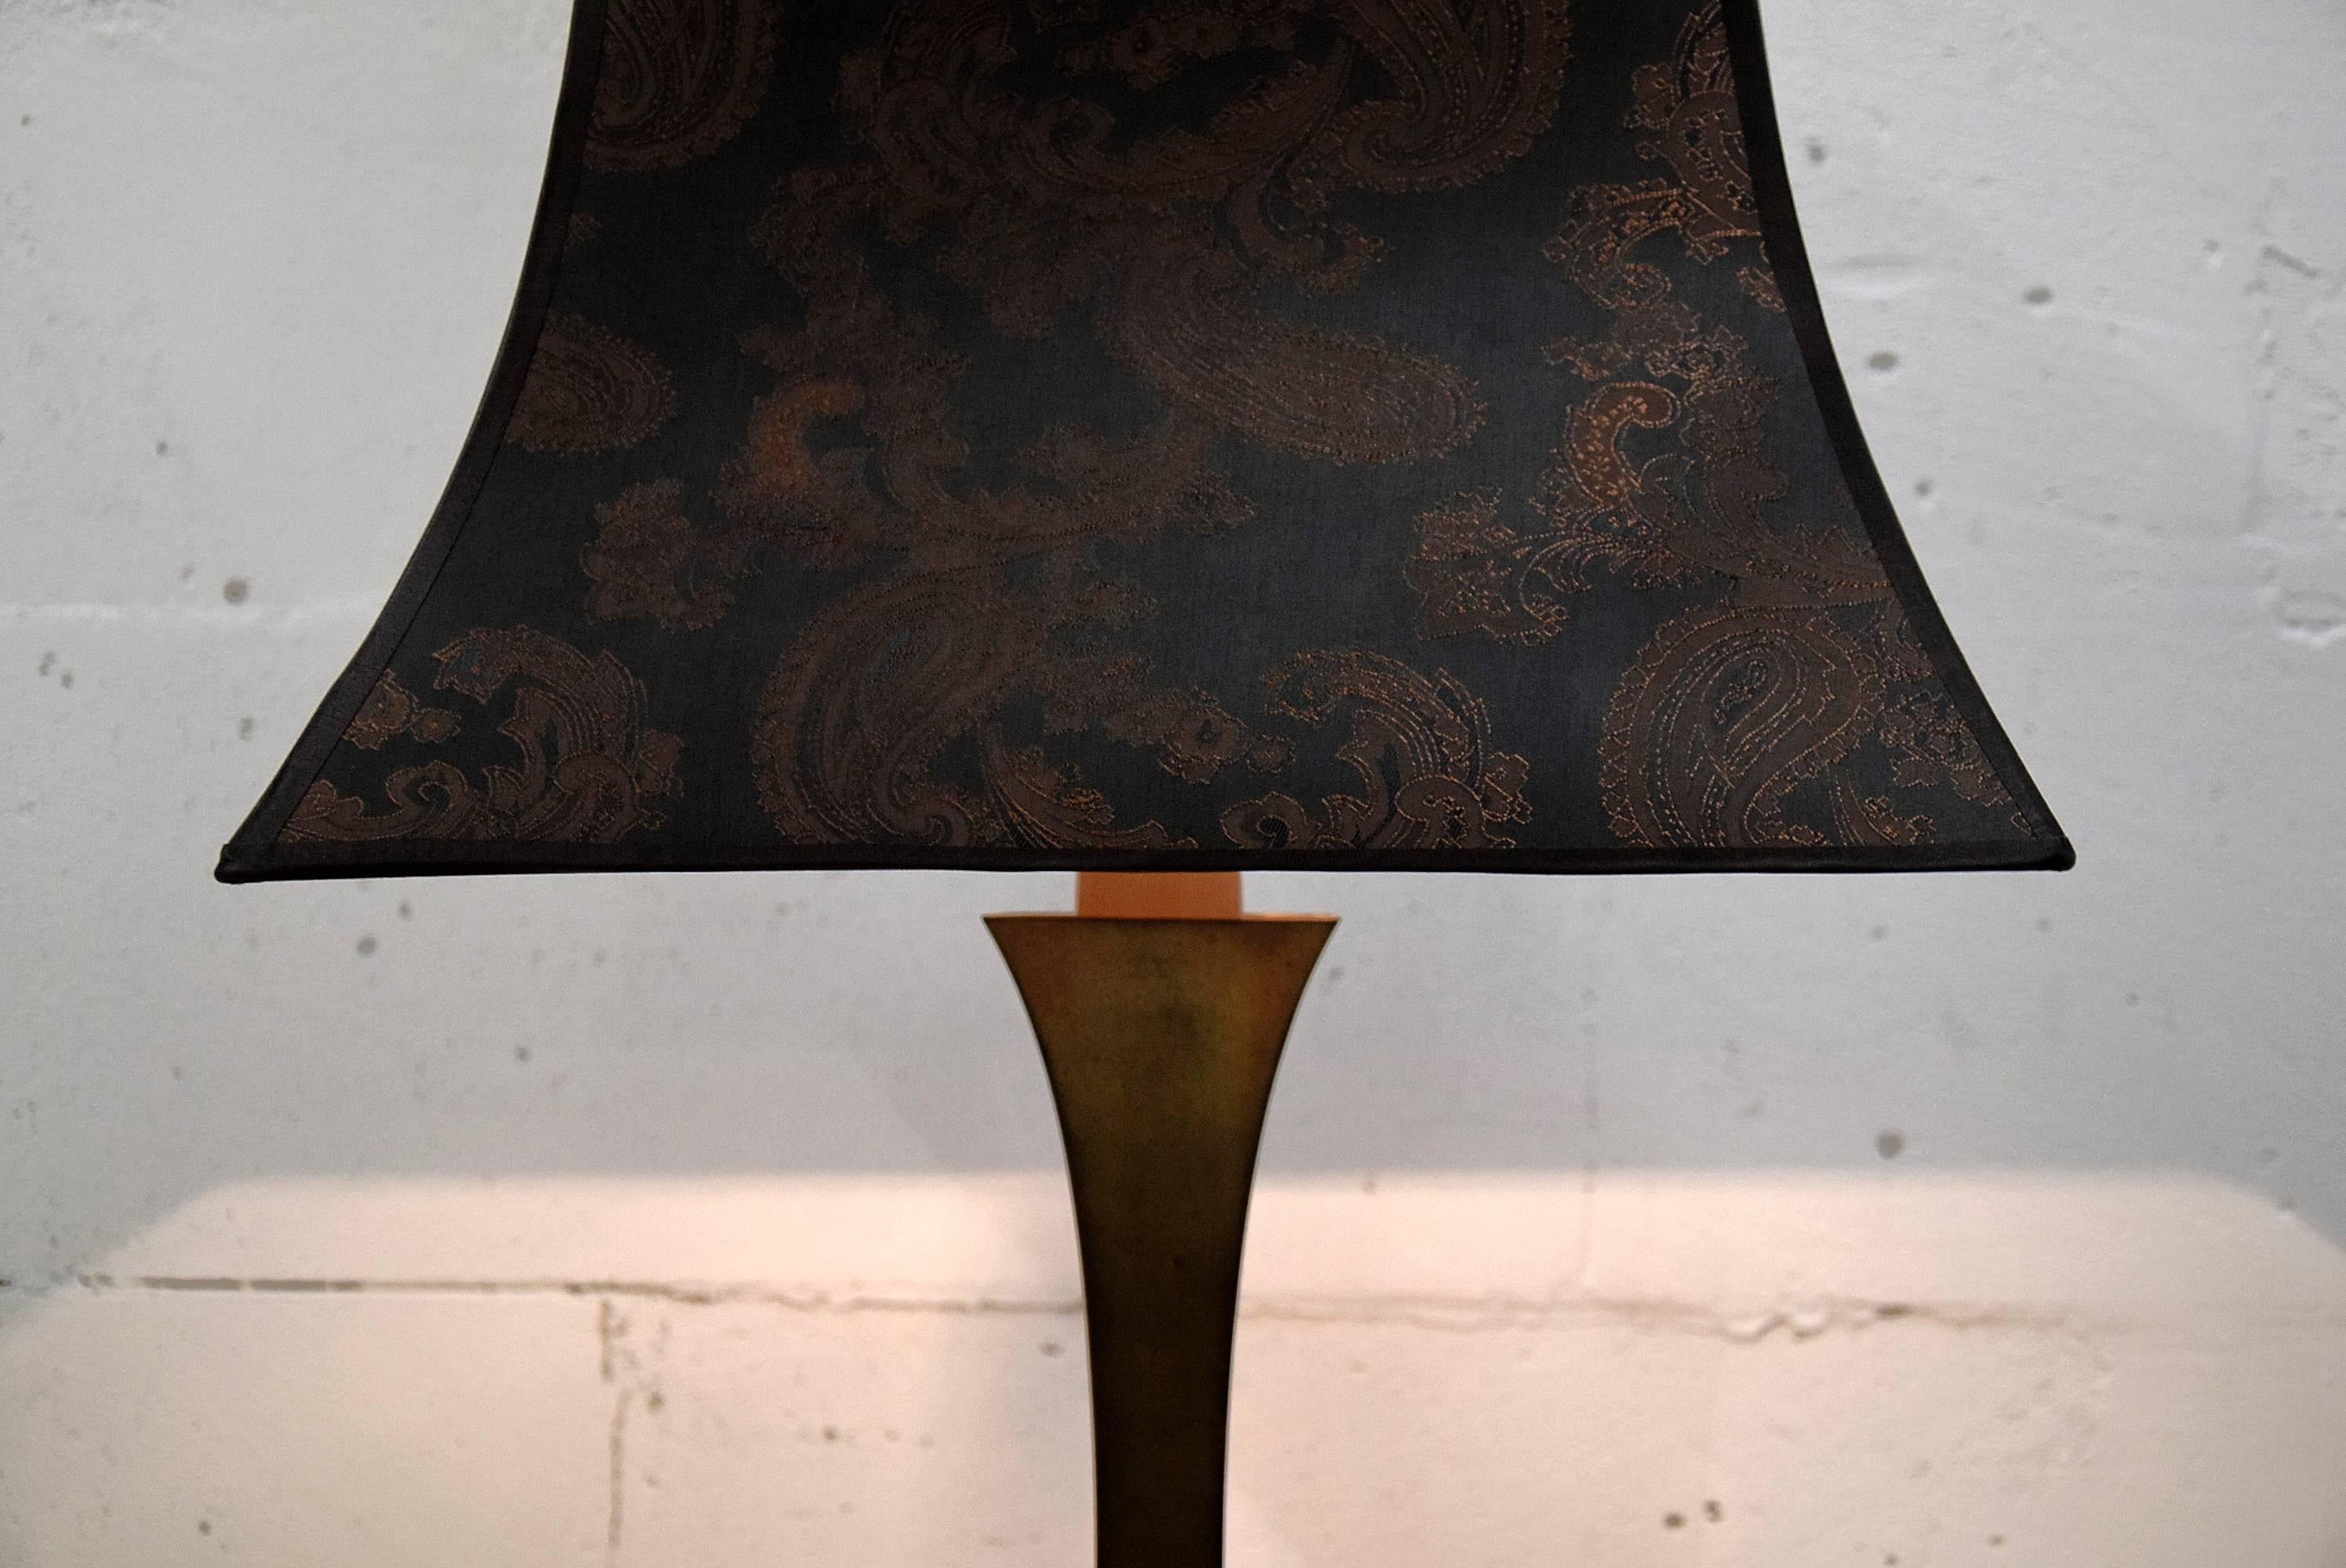 Brass Mid century Modern Maison Jansen table lamp.
Sophisticated Maison Jansen brass lamp with beautiful patina produced in France in the 1960s.
The cashmere design shade is included.

Measurements : H 82 x W 41 x D 41 cm.

Lamp will be shipped